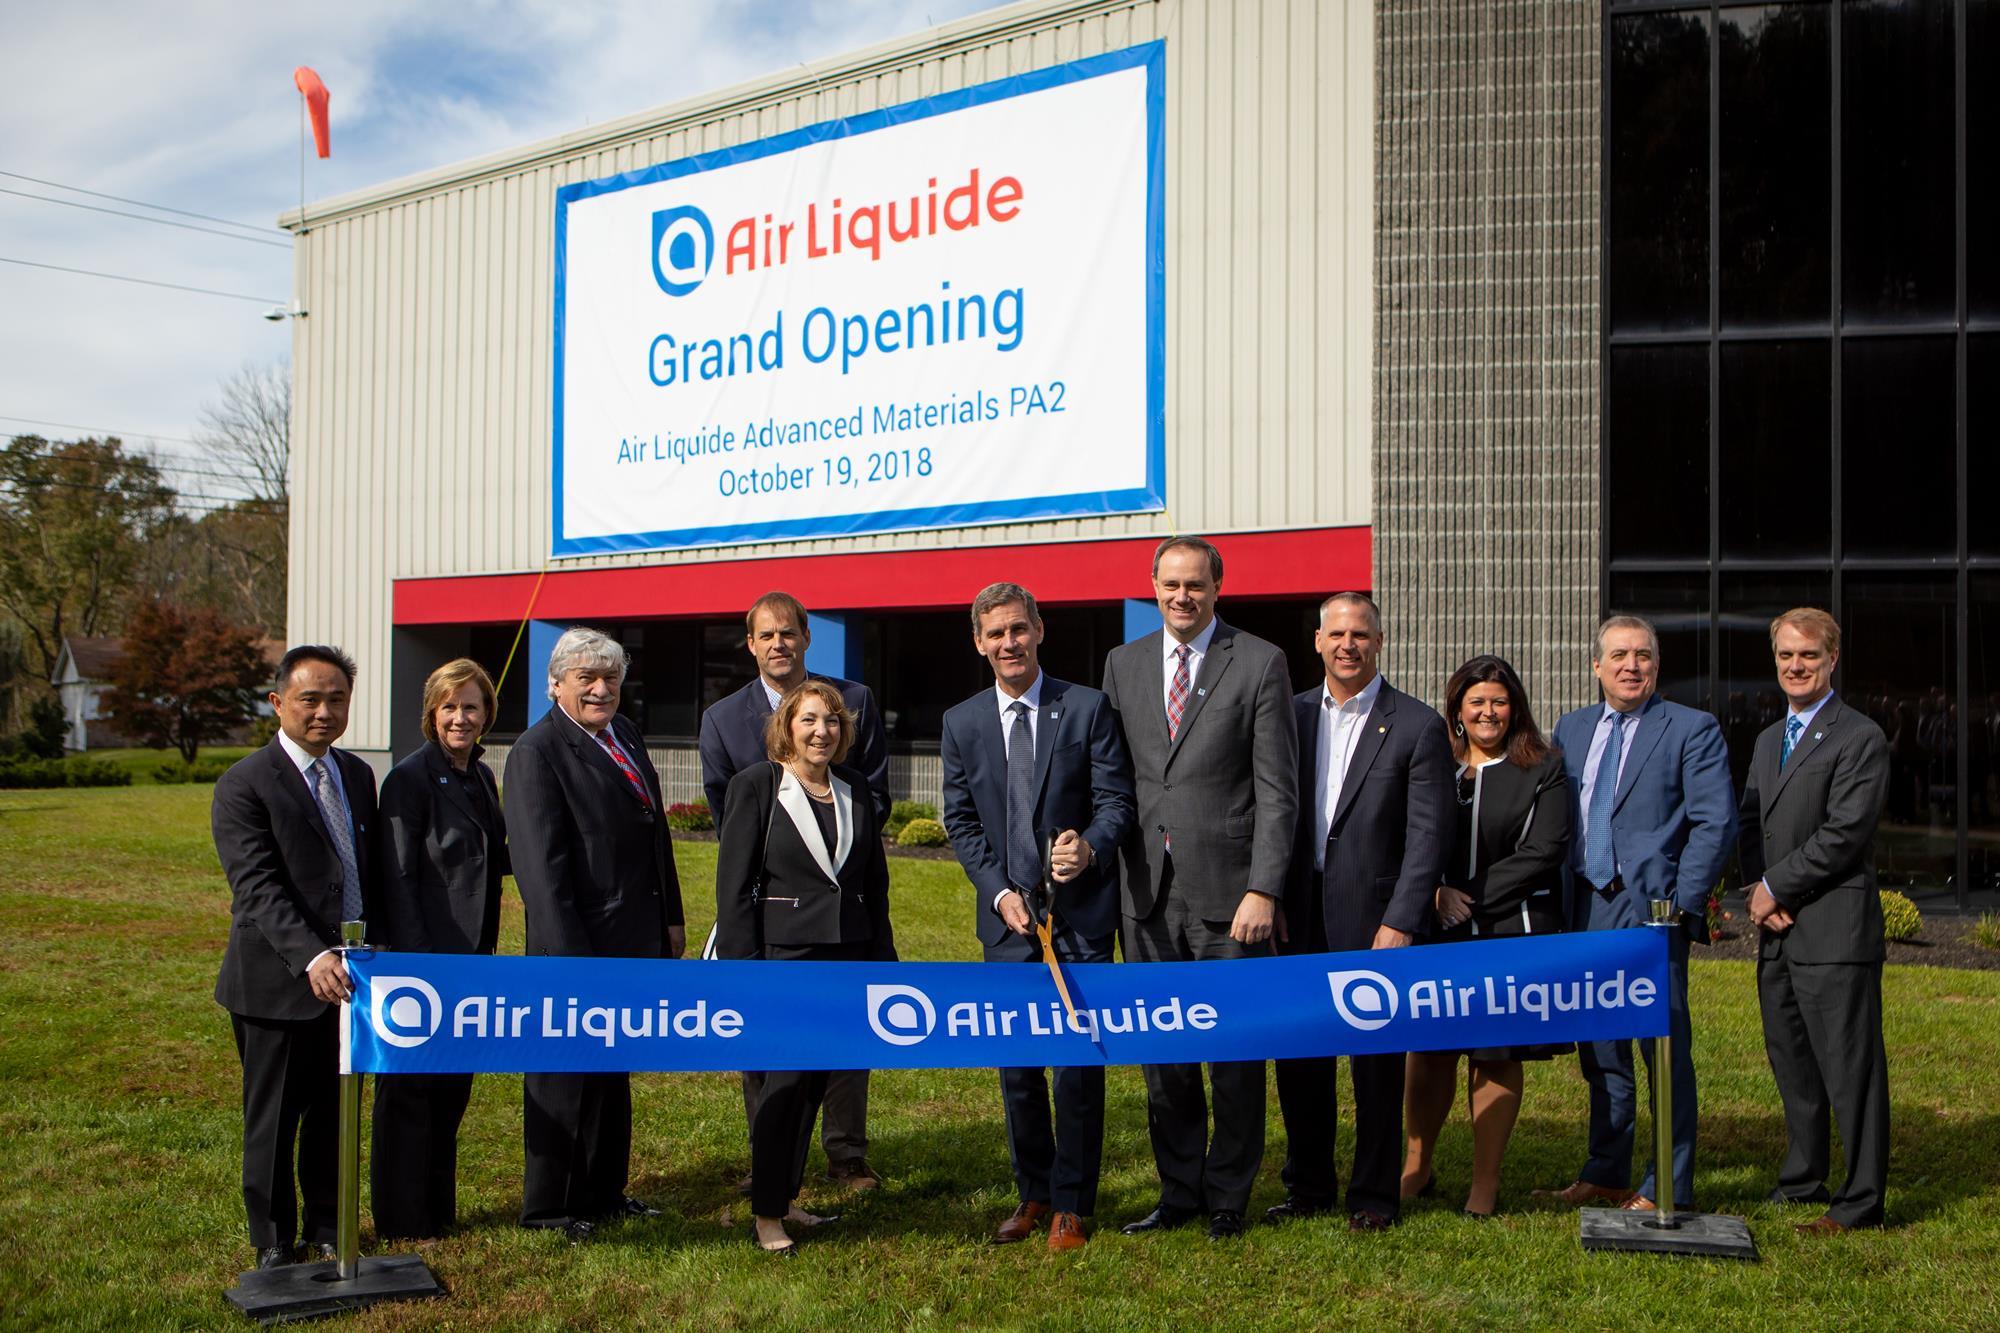 Air Liquide and Engie partners in a “green” hydrogen project on an industrial scale